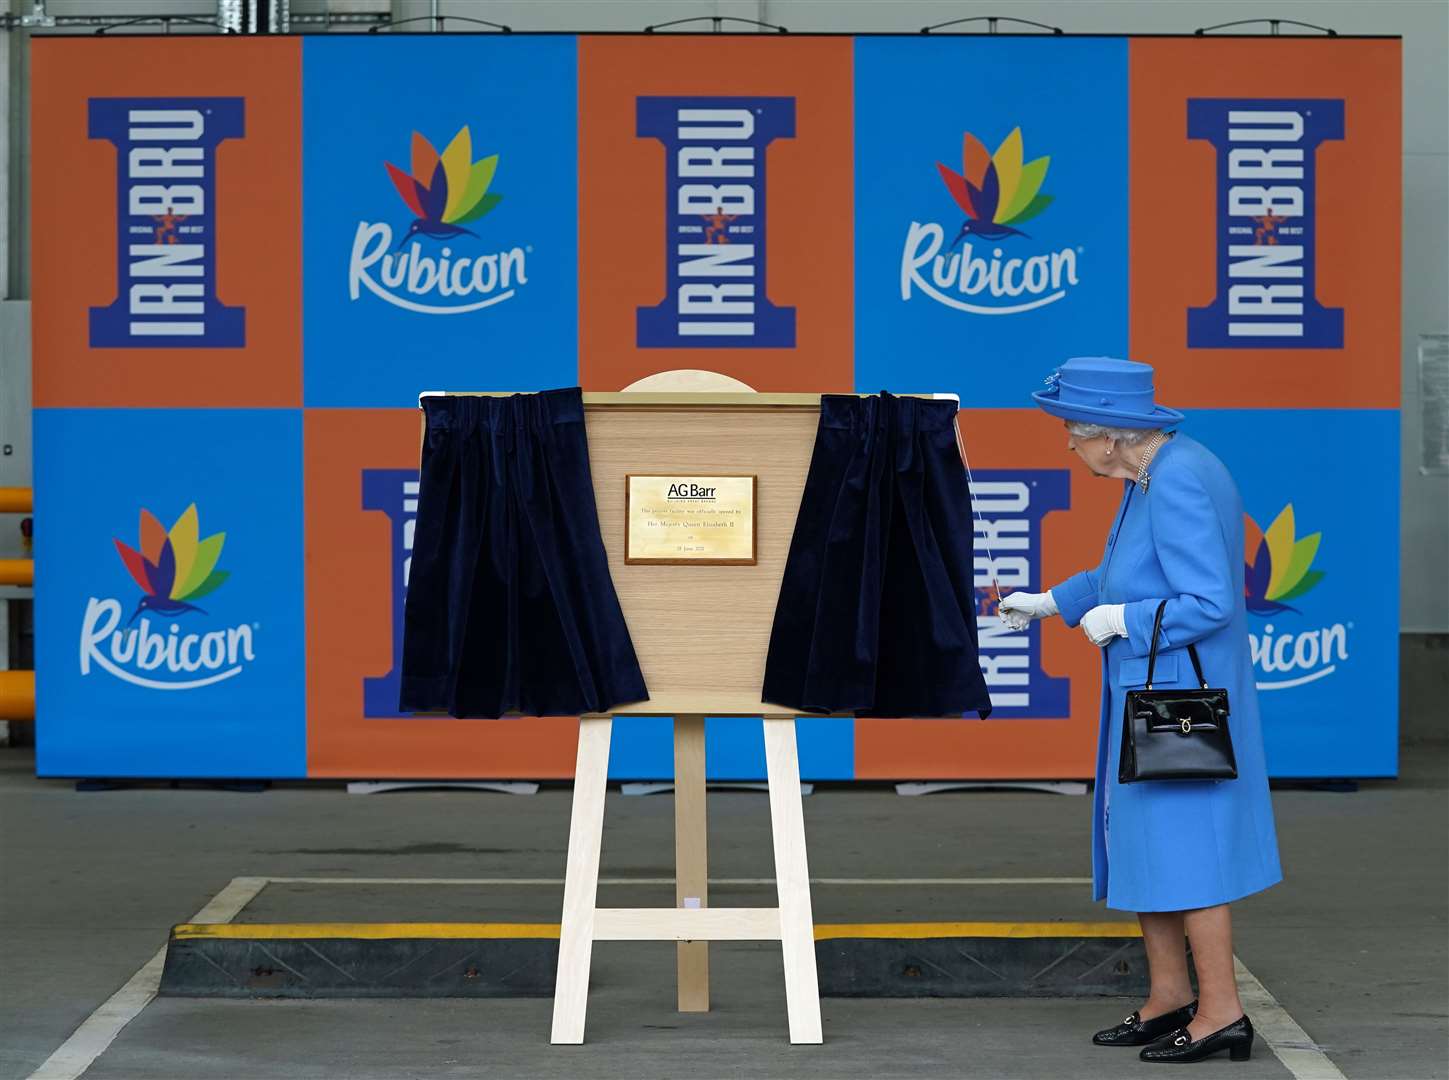 The Queen unveils a plaque during a visit to AG Barr’s factory in Cumbernauld, where the Irn-Bru drink is manufactured, as part of her traditional trip to Scotland for Holyrood Week in June (Andrew Milligan/PA)